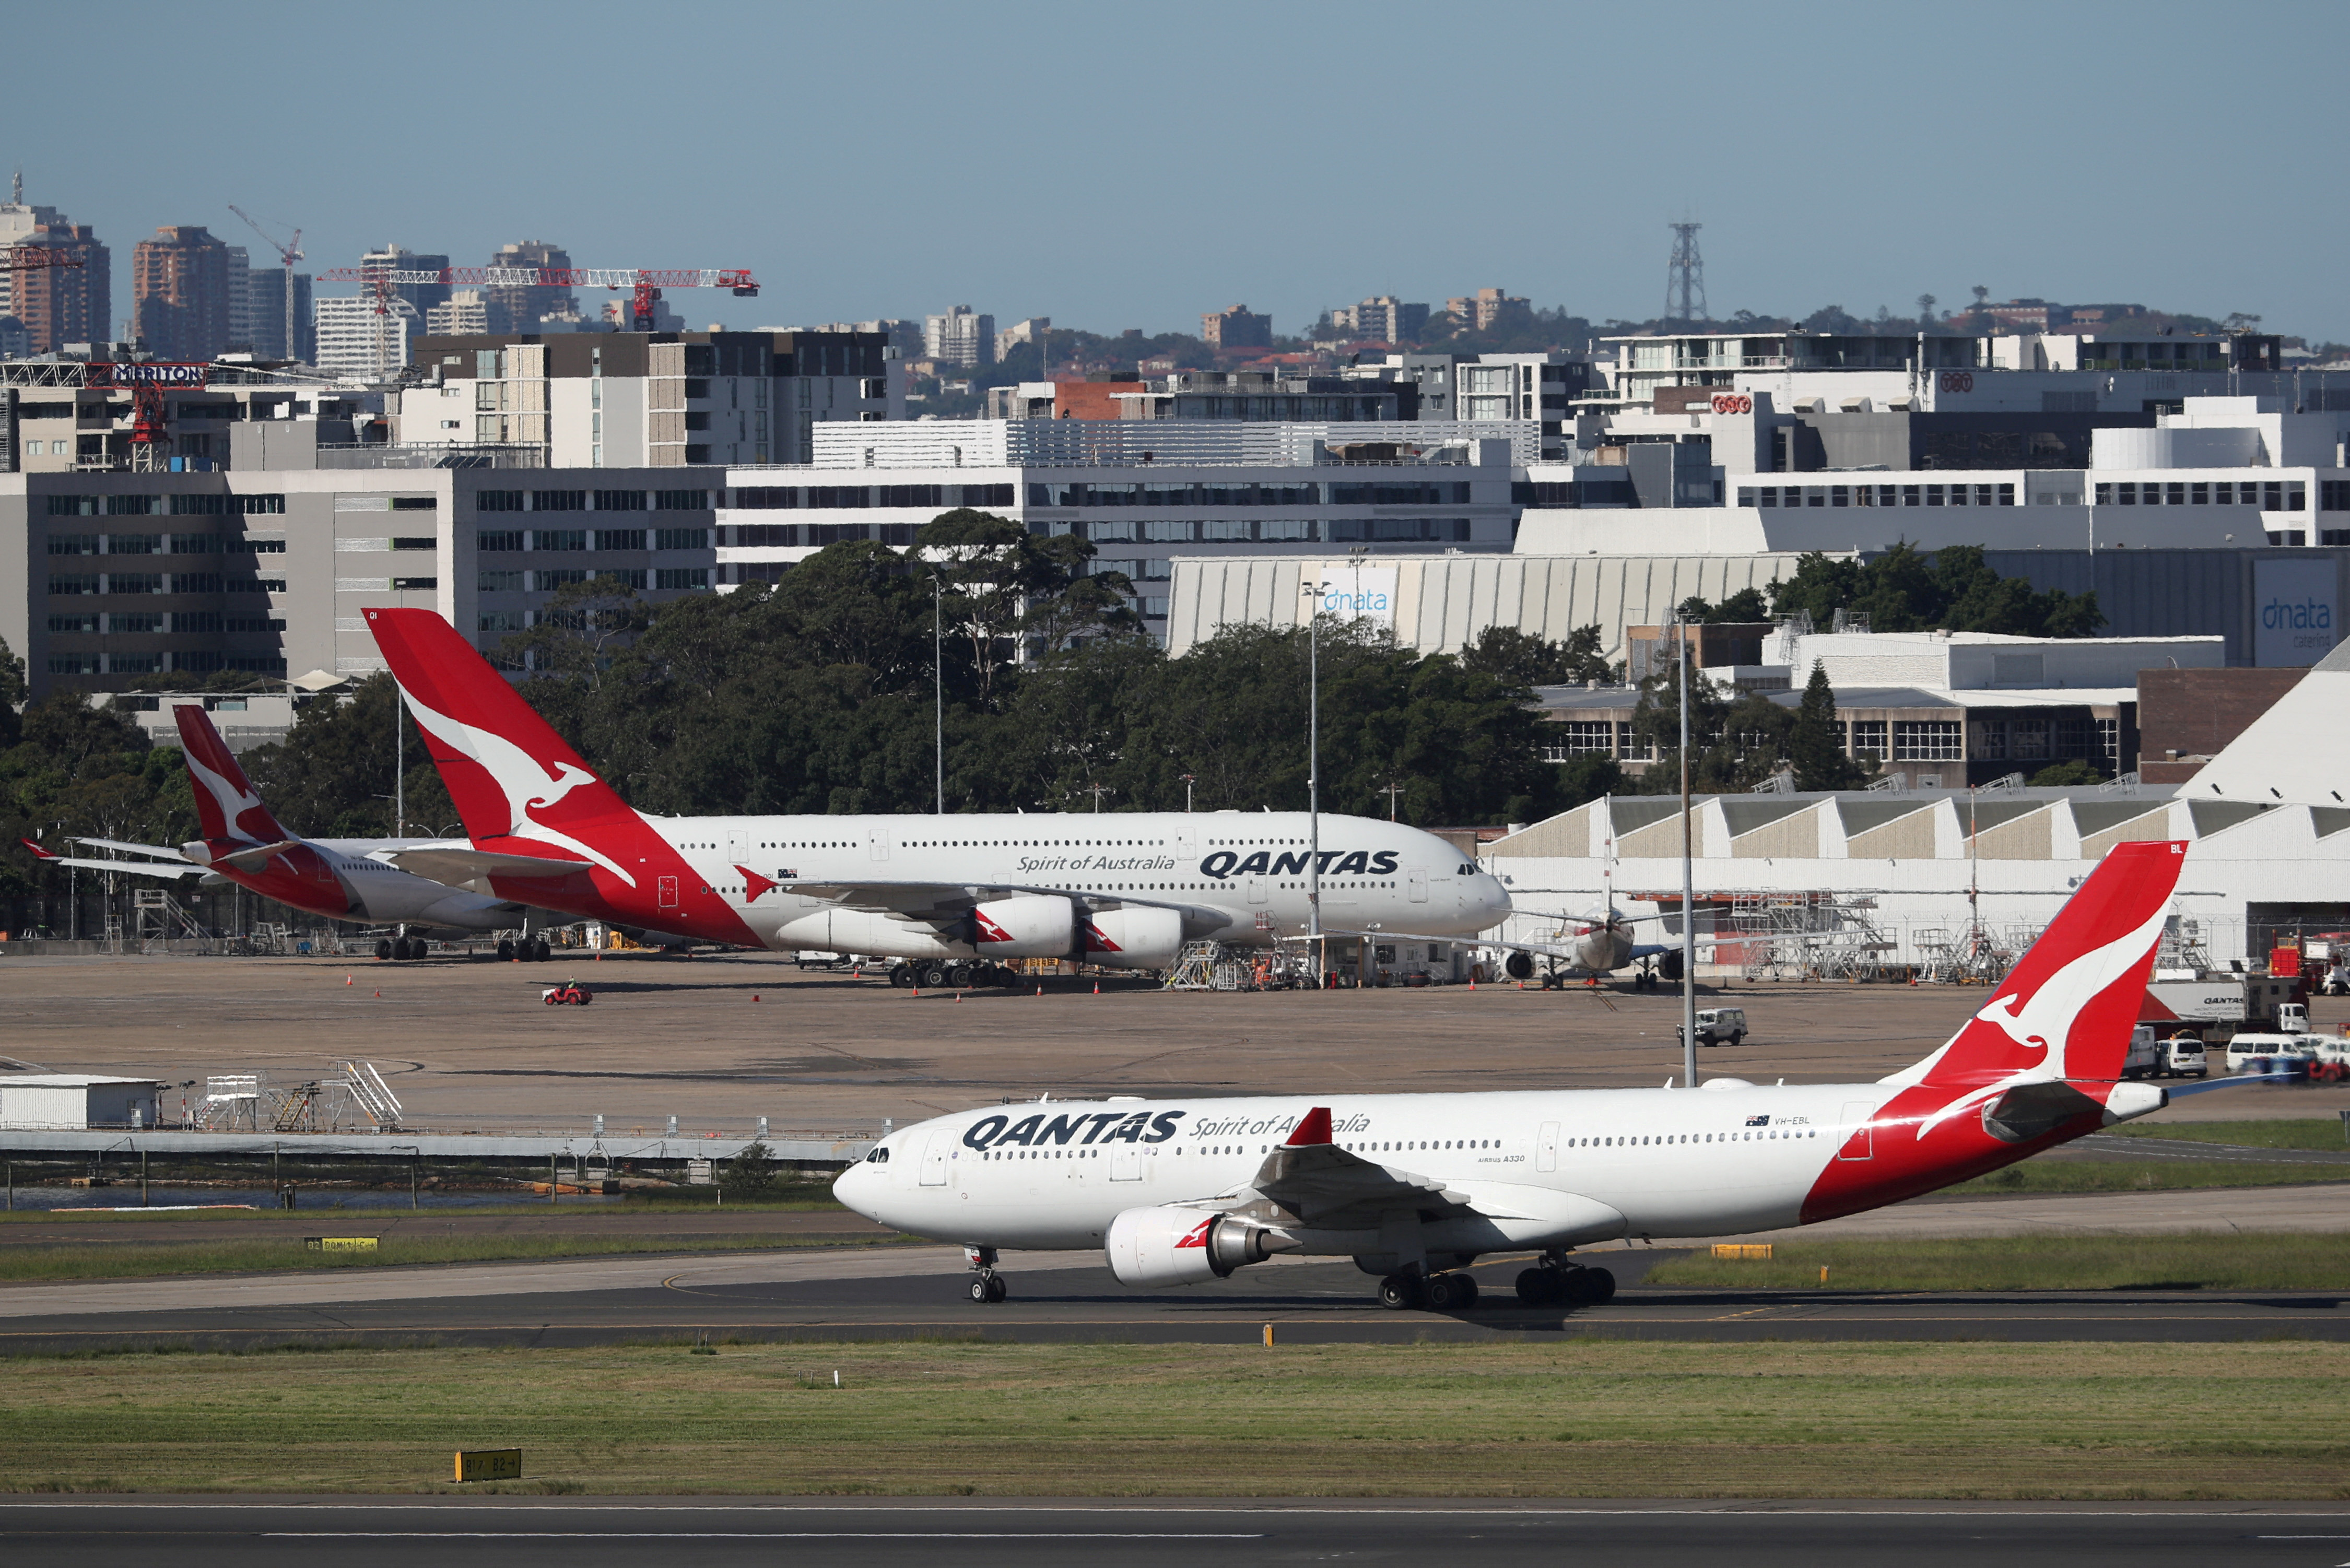 Qantas planes are seen at Kingsford Smith International Airport in Sydney